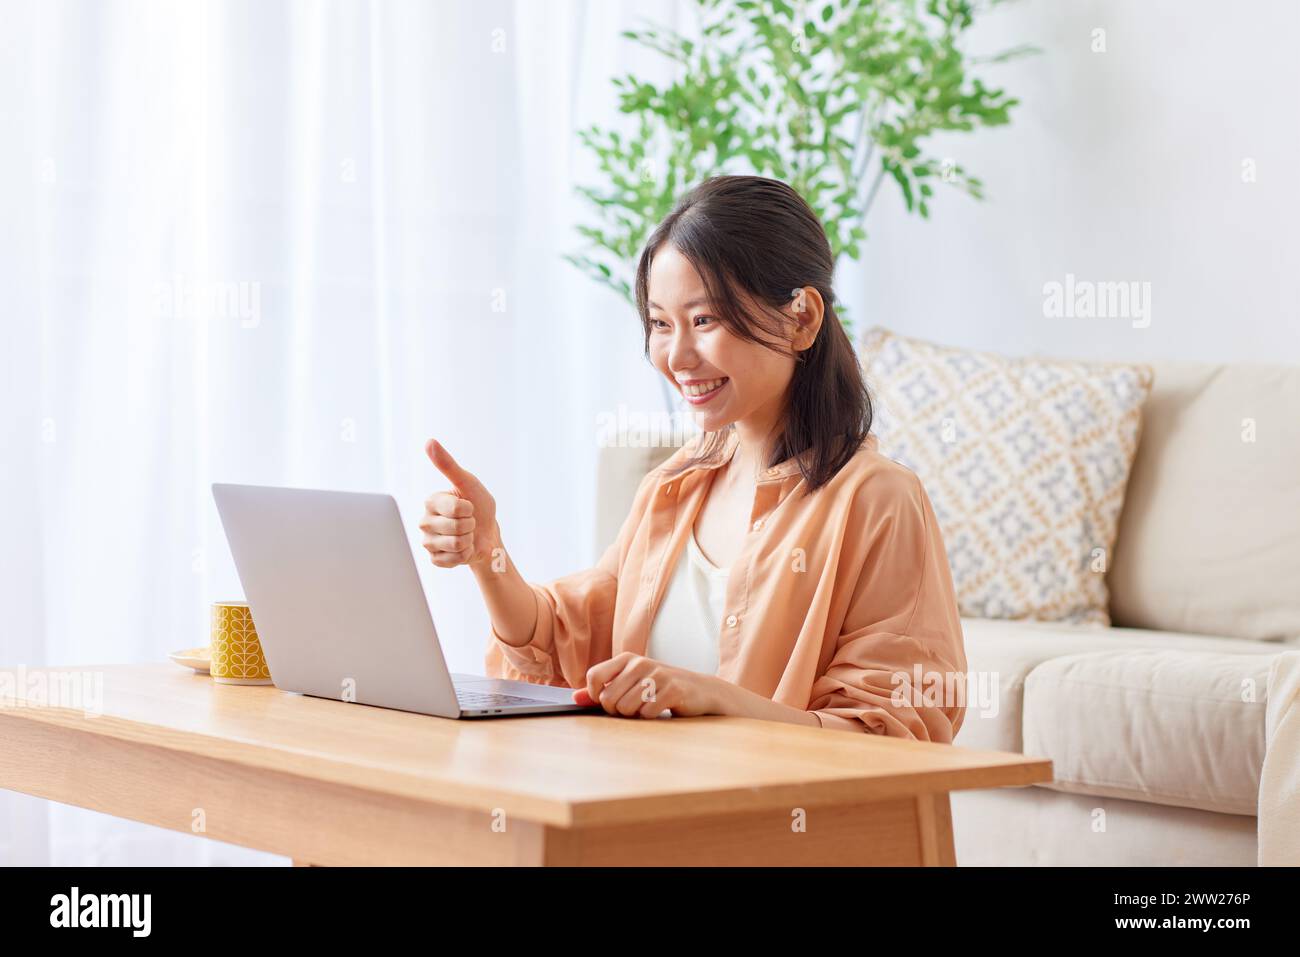 Asian woman using laptop at home Banque D'Images